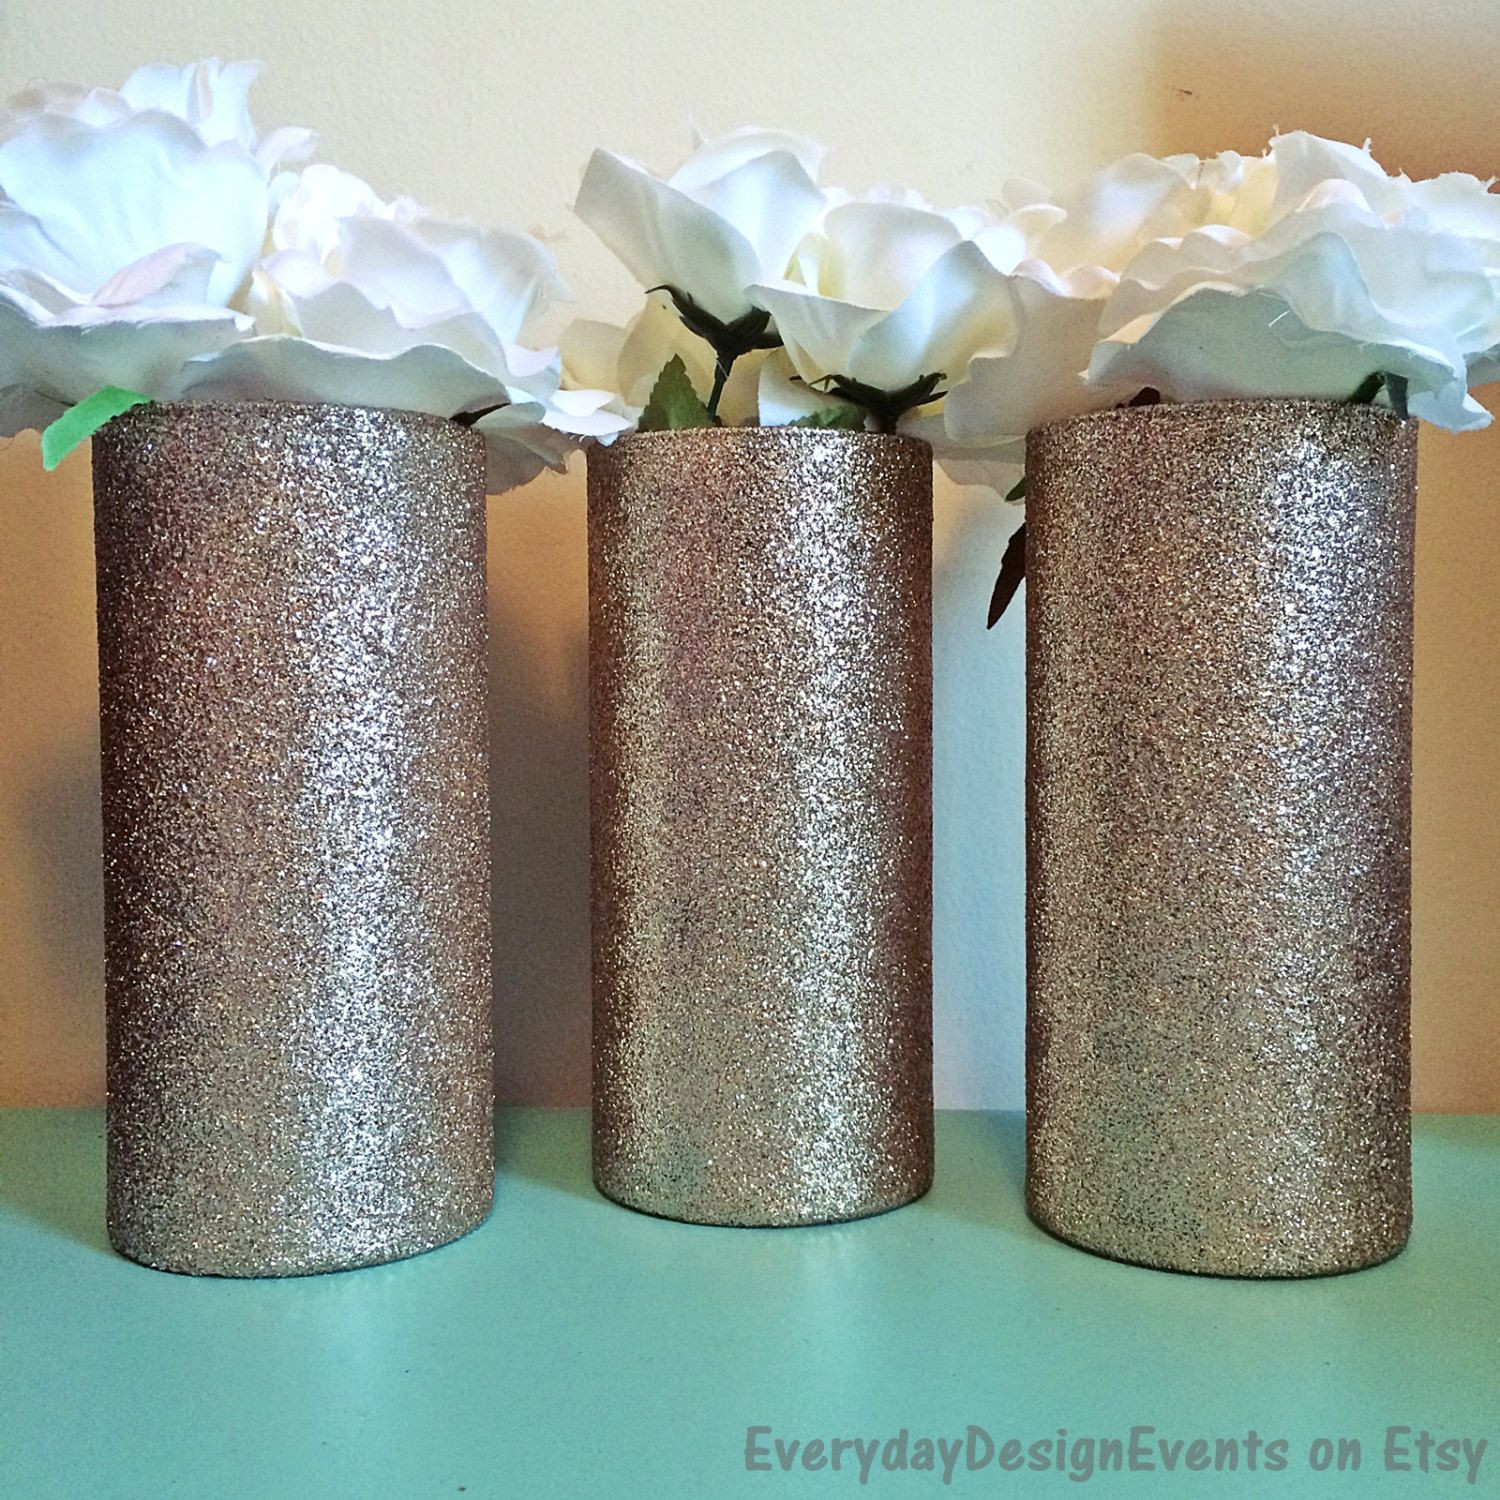 rose colored glass vase of 3 champagne gold glass vases gold vases wedding centerpieces gold with regard to 3 champagne gold glass vases gold vases wedding centerpieces gold centerpieces rose gold wedding wedding wedding decor